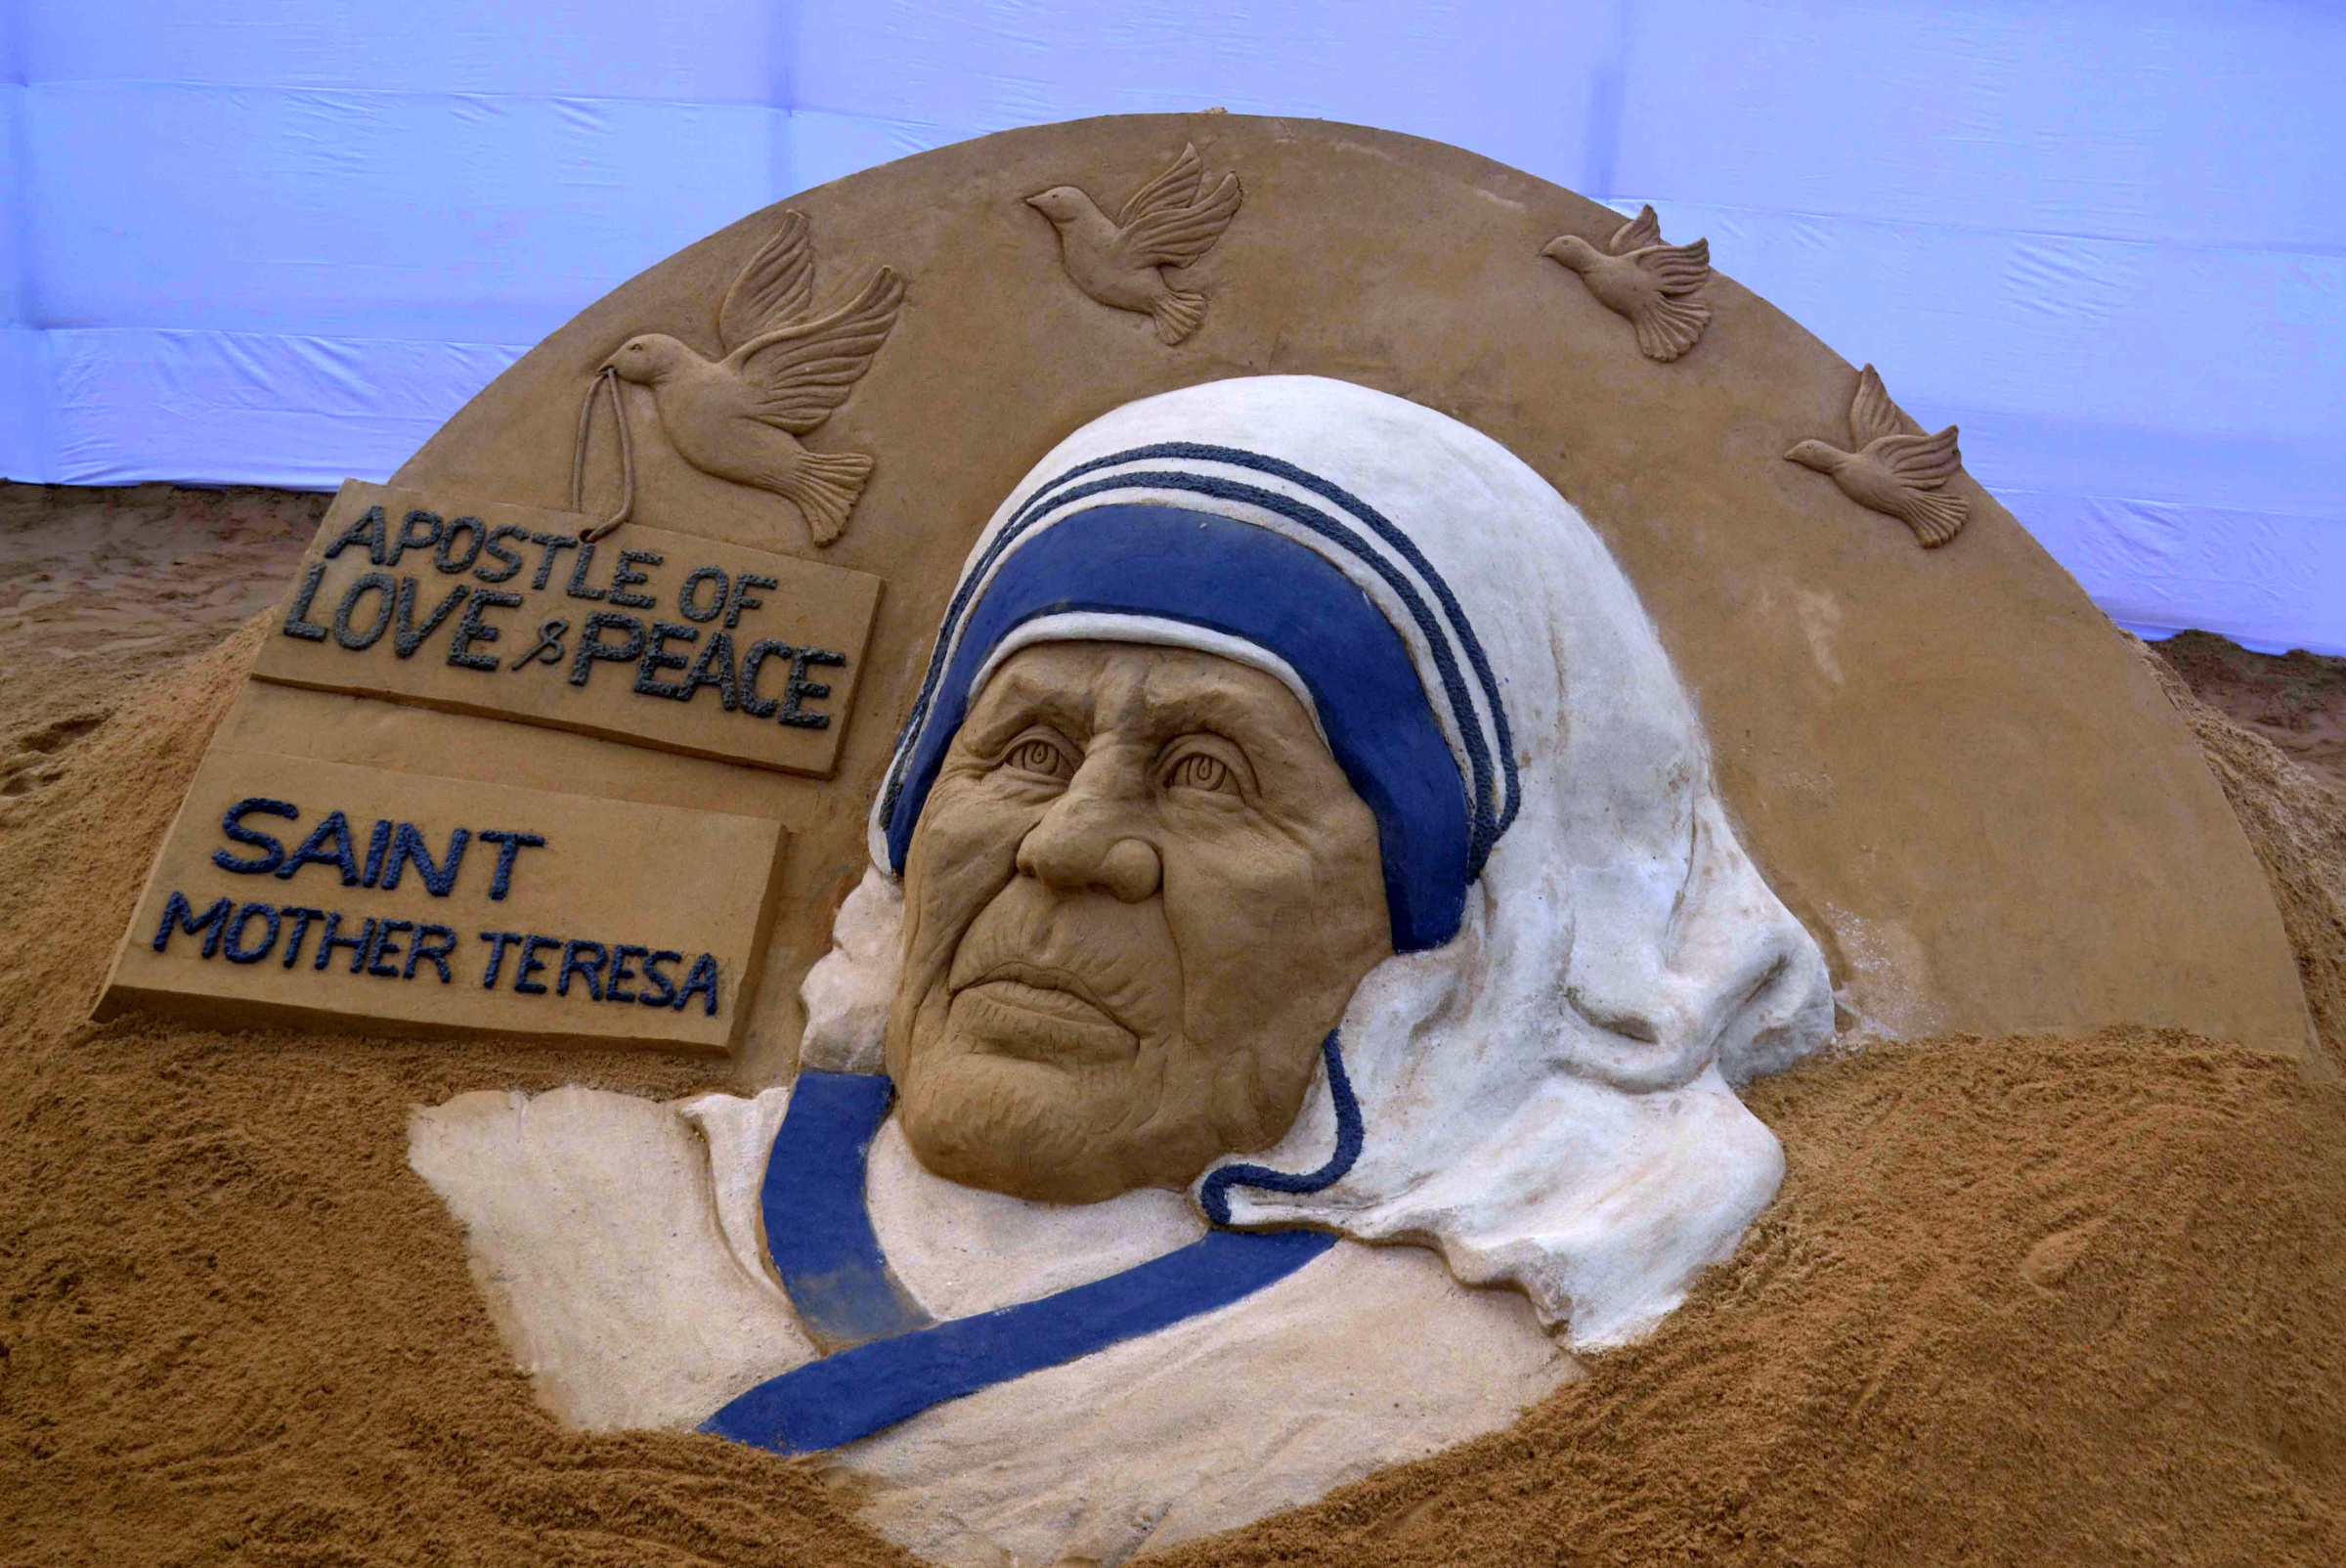 A sand sculpture of Blessed Teresa of Kolkata is seen in Rourkela, India, Dec. 18, 2015. Although the Sept. 4 canonization of Blessed Teresa is at the Vatican, special festivities to honor her will continue in Kolkata until Christmas.(CNS photo/Stringer, EPA)